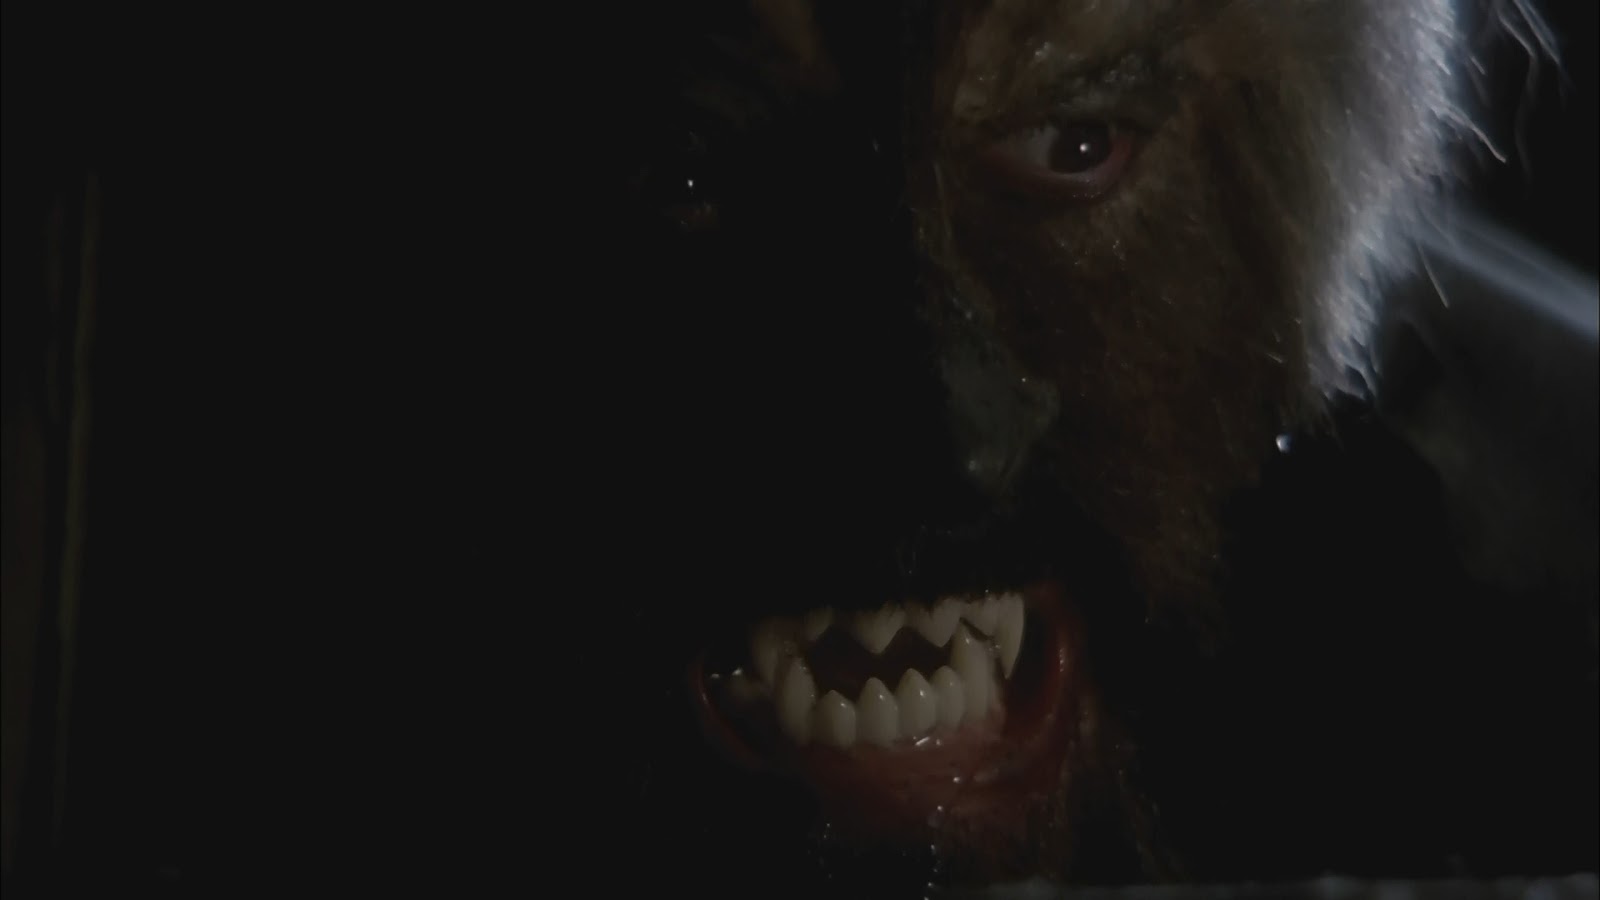 HORROR 101 with Dr. AC: NIGHT OF THE WEREWOLF (1981) Blu-ray review